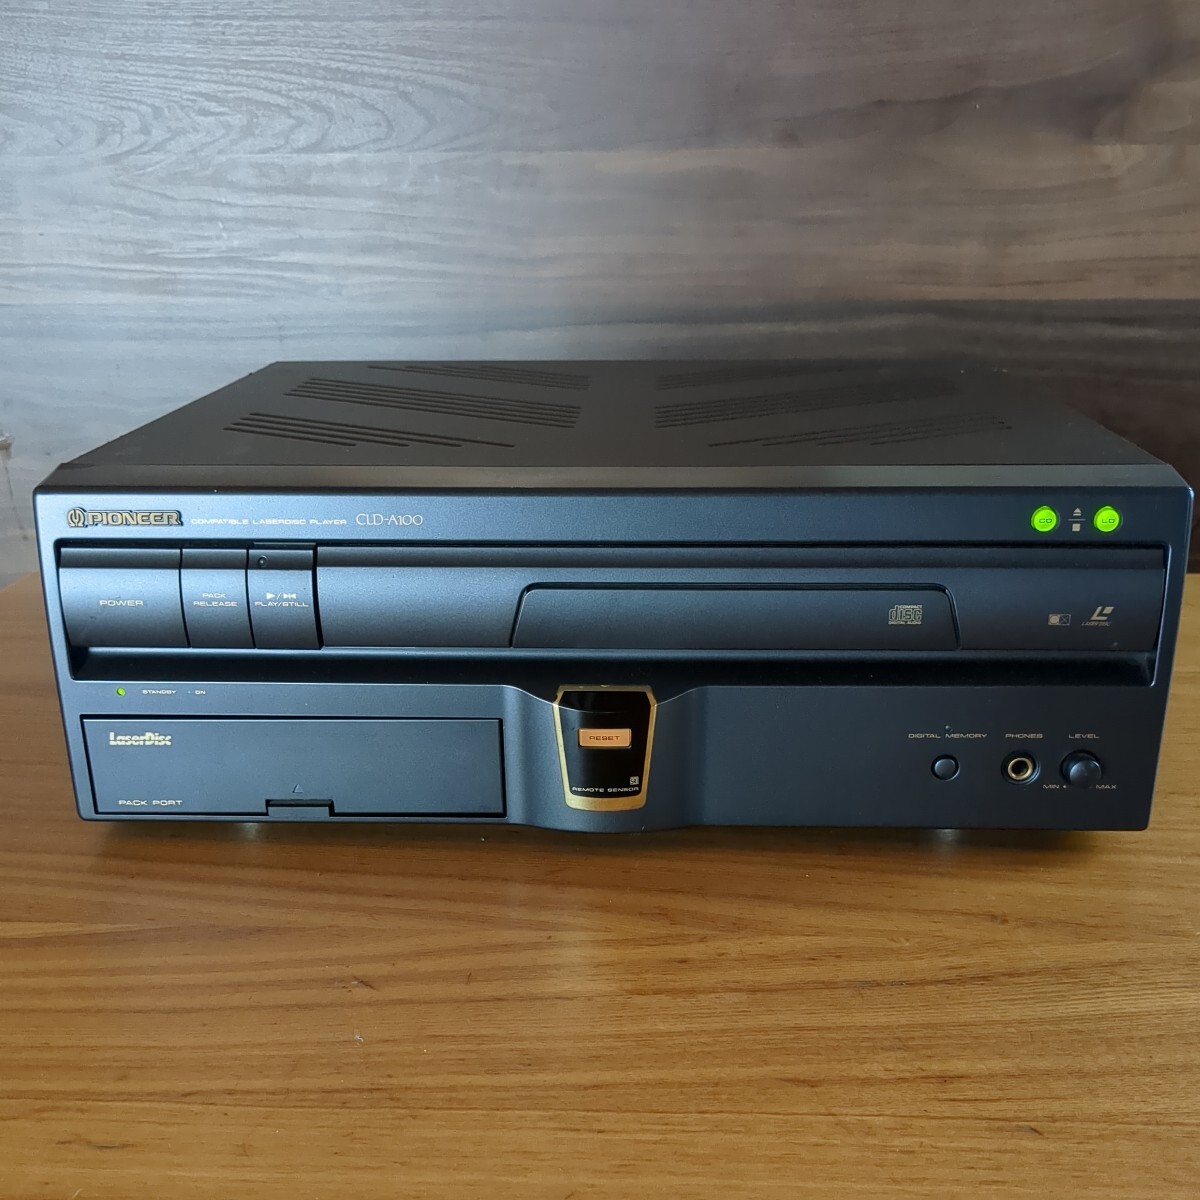 PIONEER Laser active Compatible bru laser disk player CLD-A100 LD player Pioneer Junk LD/CD player 